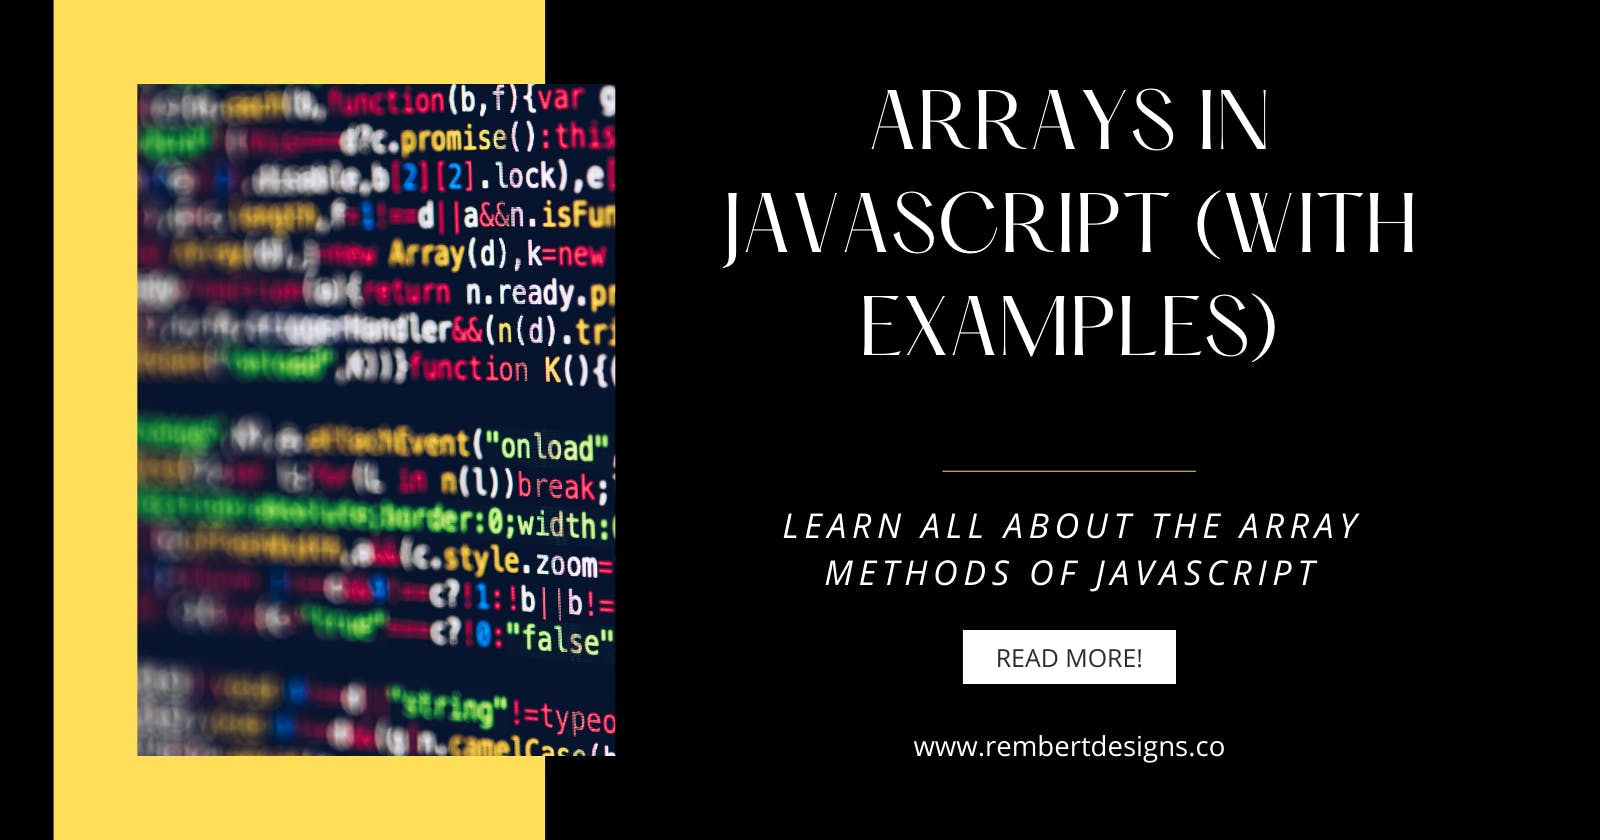 Arrays in Javascript (With Examples)